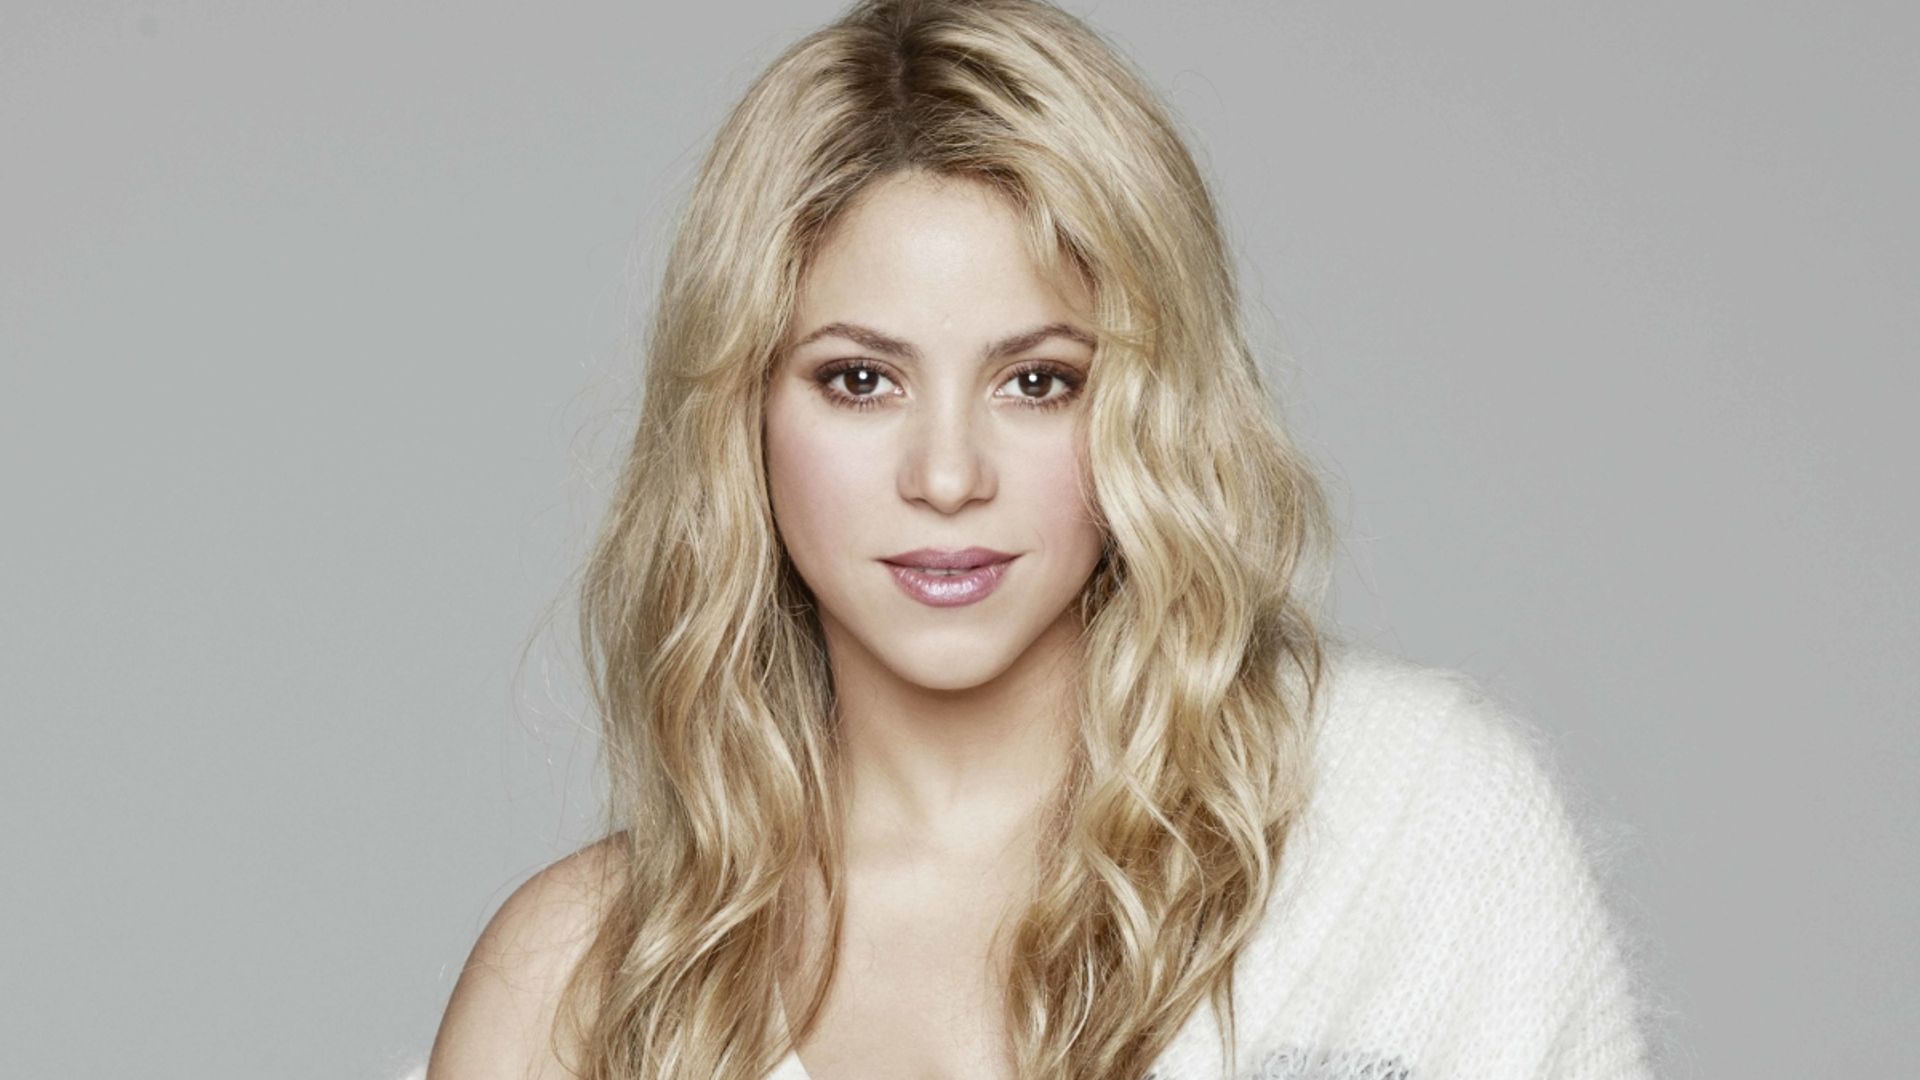 Shakira poses for playful Easter snap with unexpected robot partner